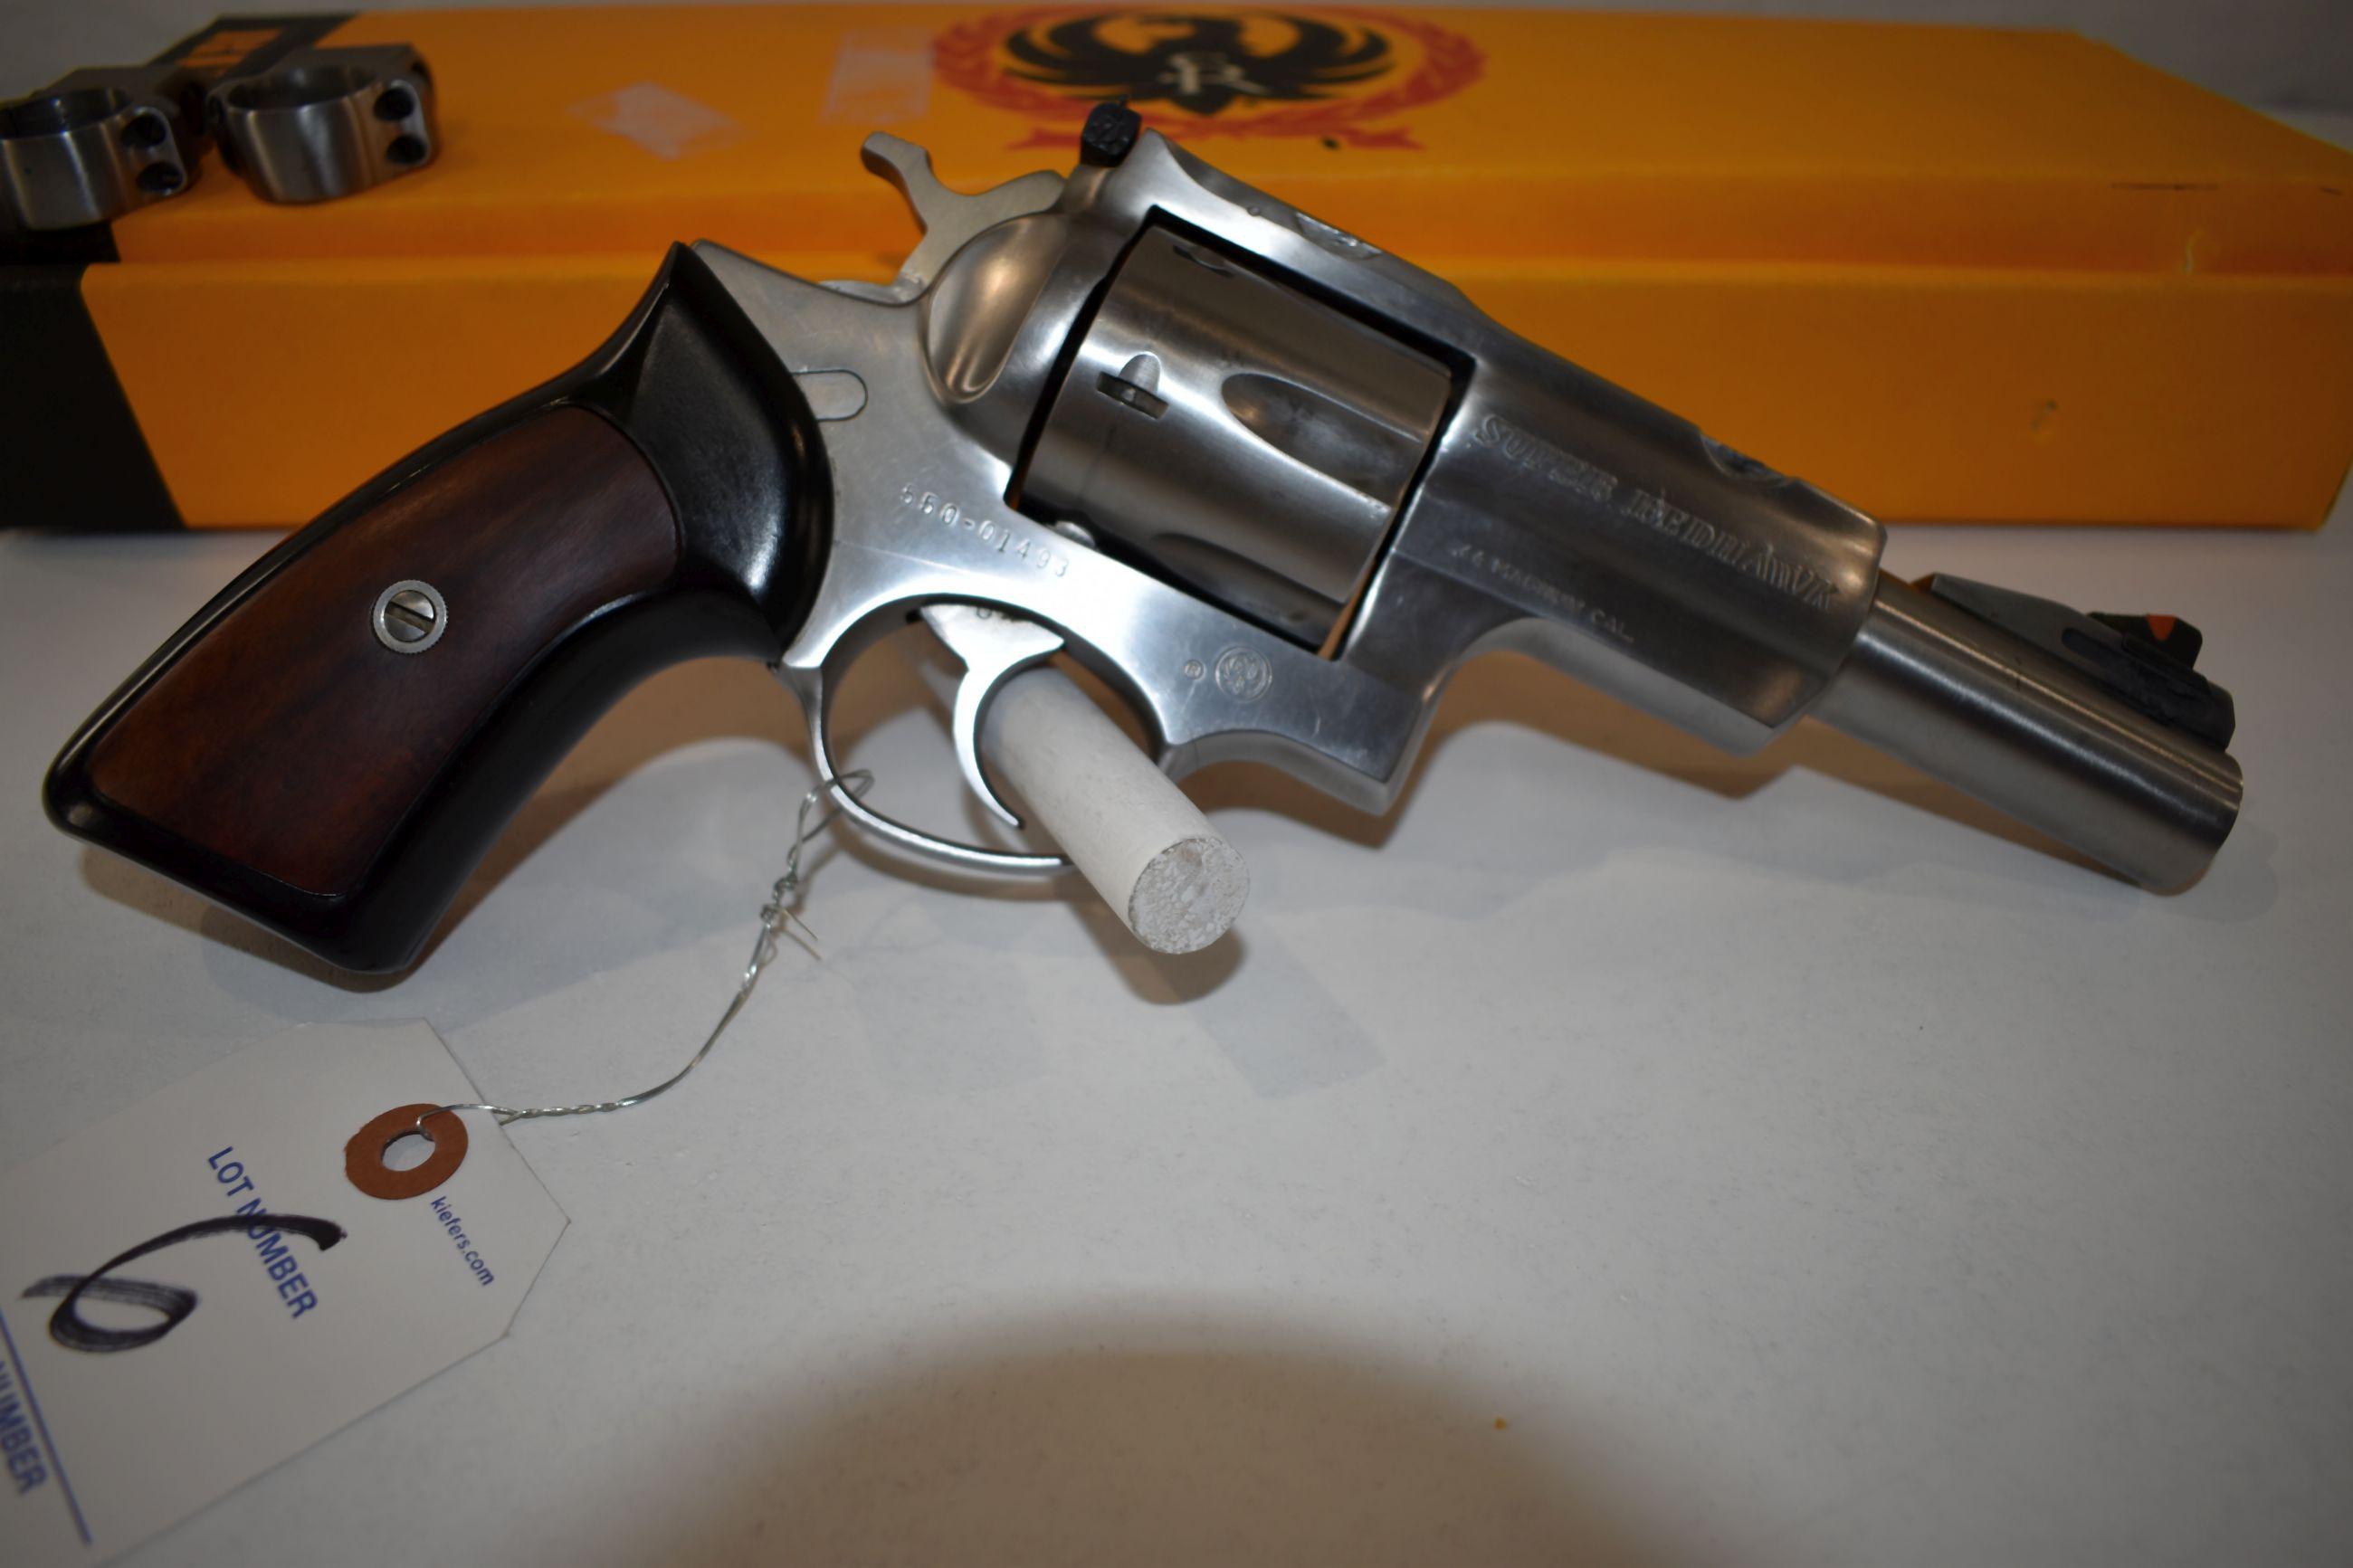 Ruger Super Redhawk 44 Mag Revolver, Stainless, 5" Barrel, SN: 550-01493, scope rings, With Box, box